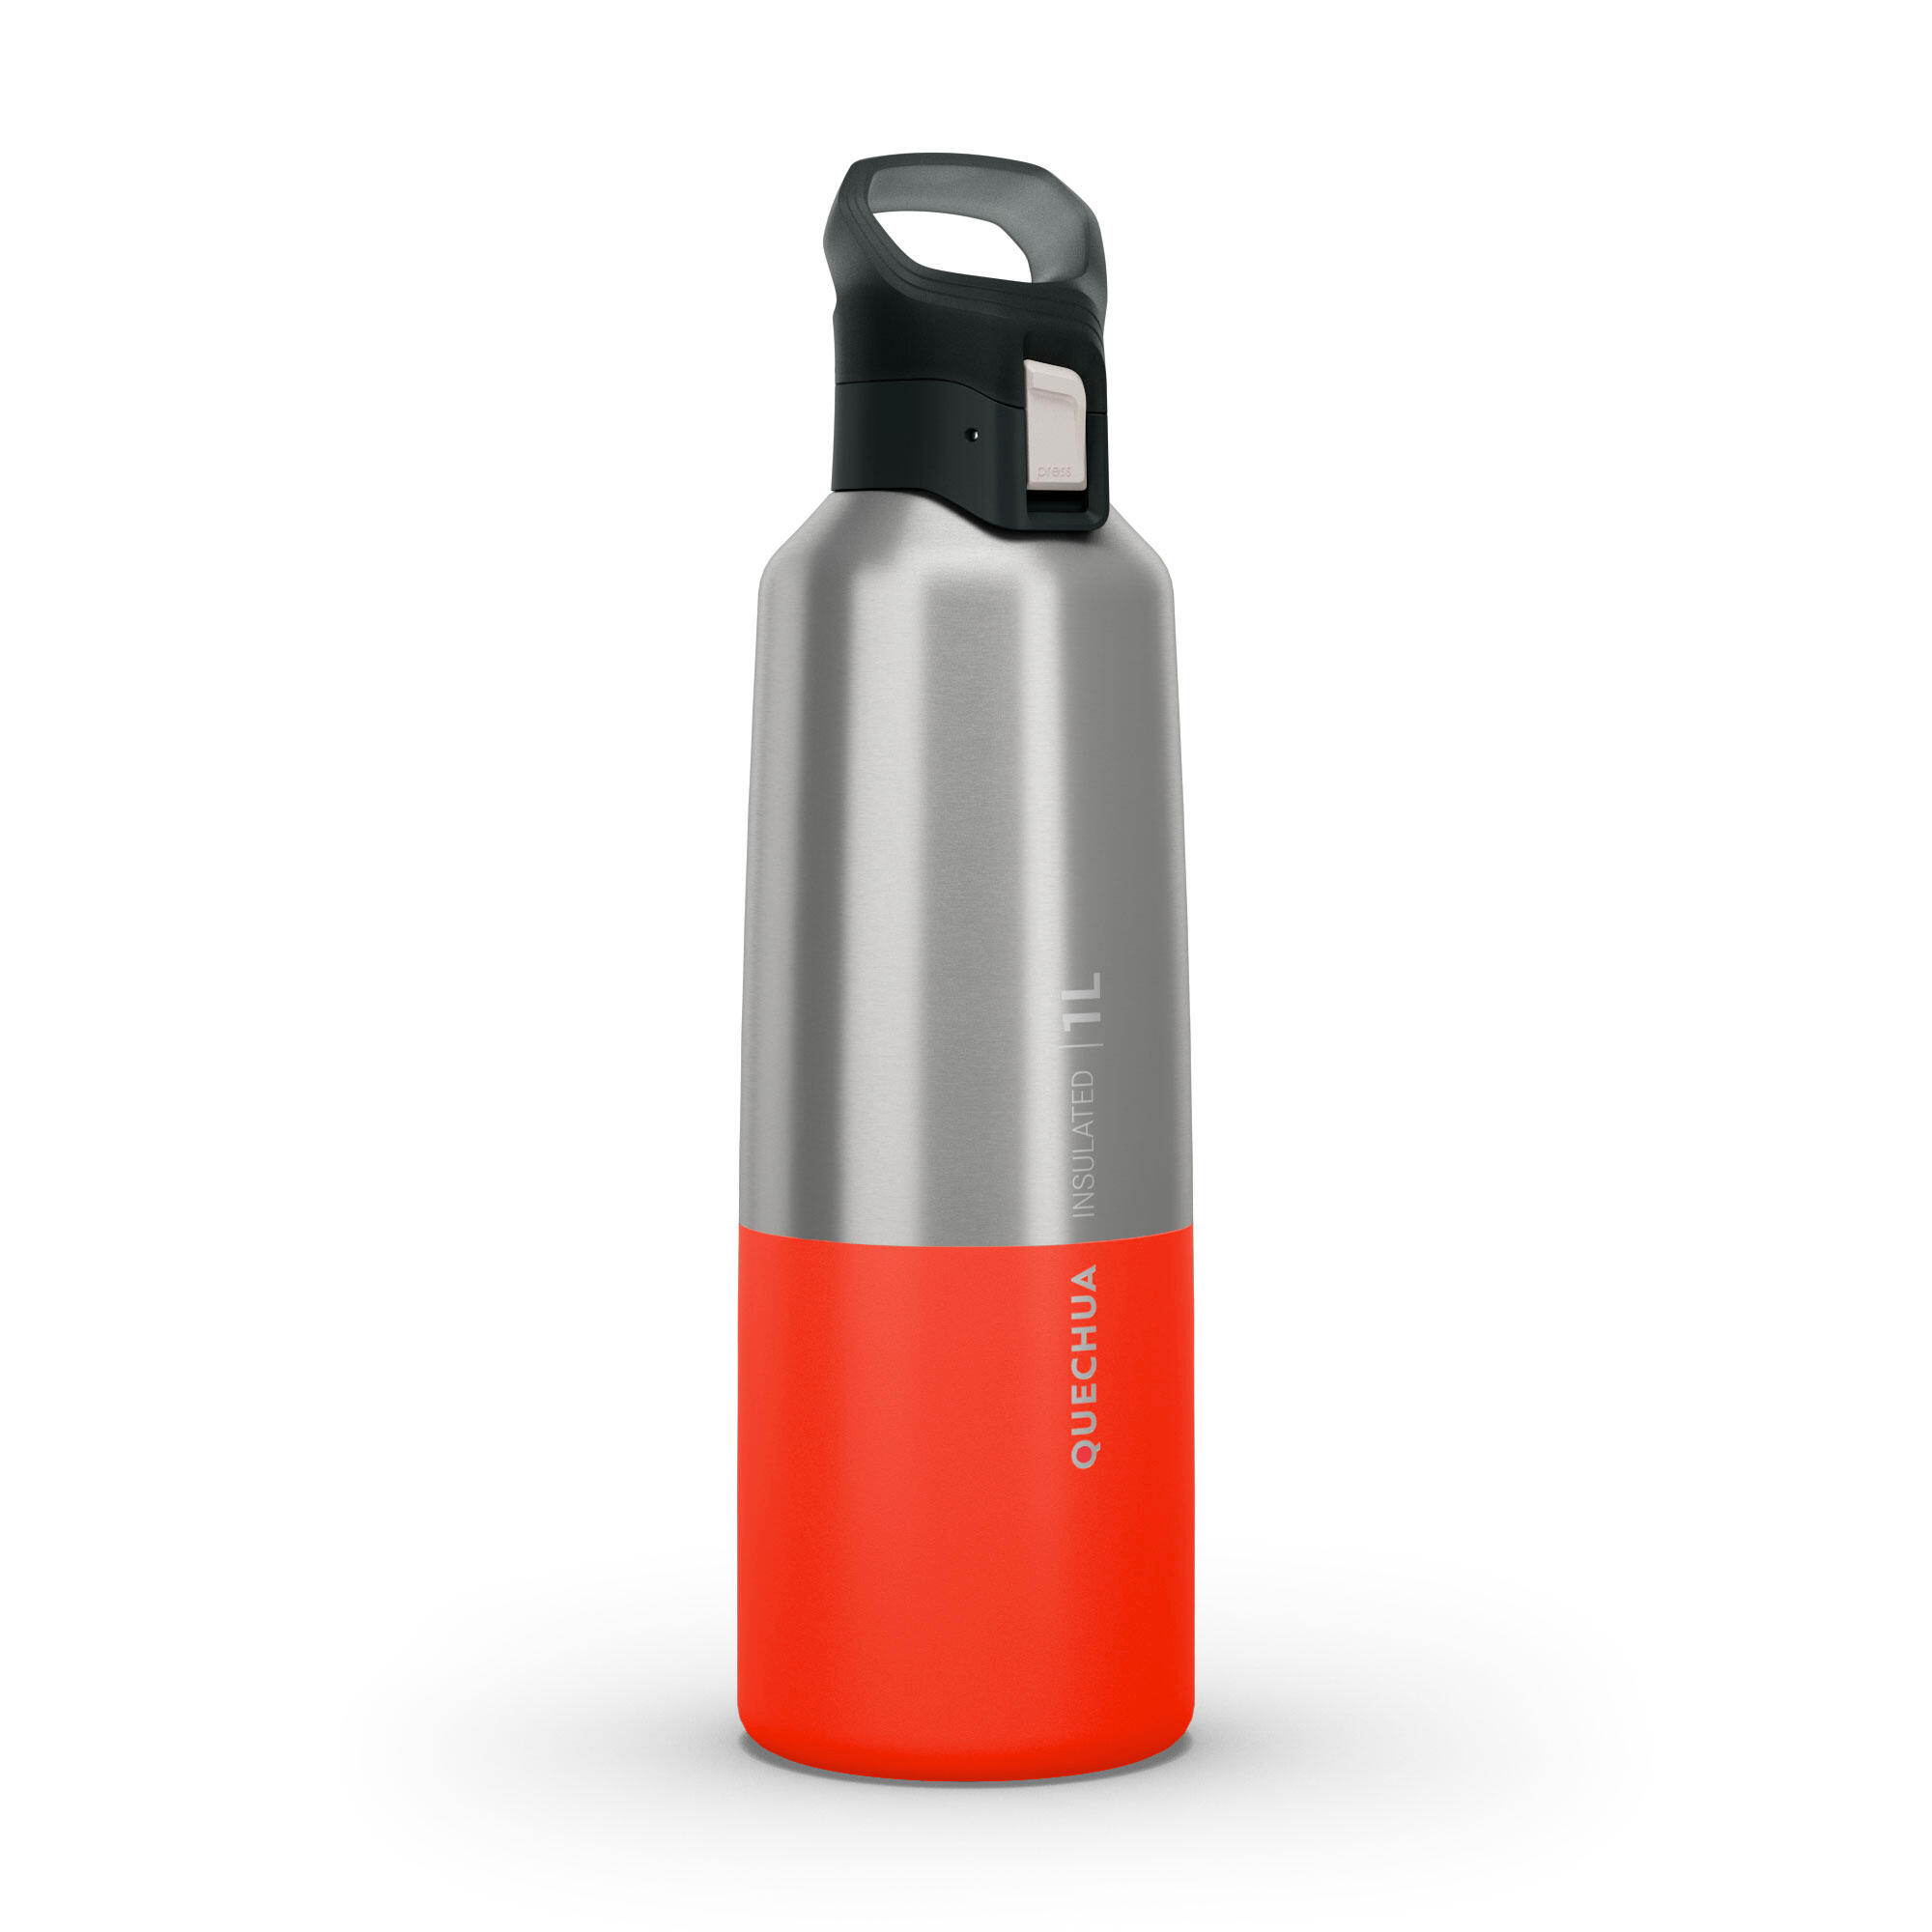 QUECHUA 1 L insulated stainless steel flask with quick opening cap for hiking - Red